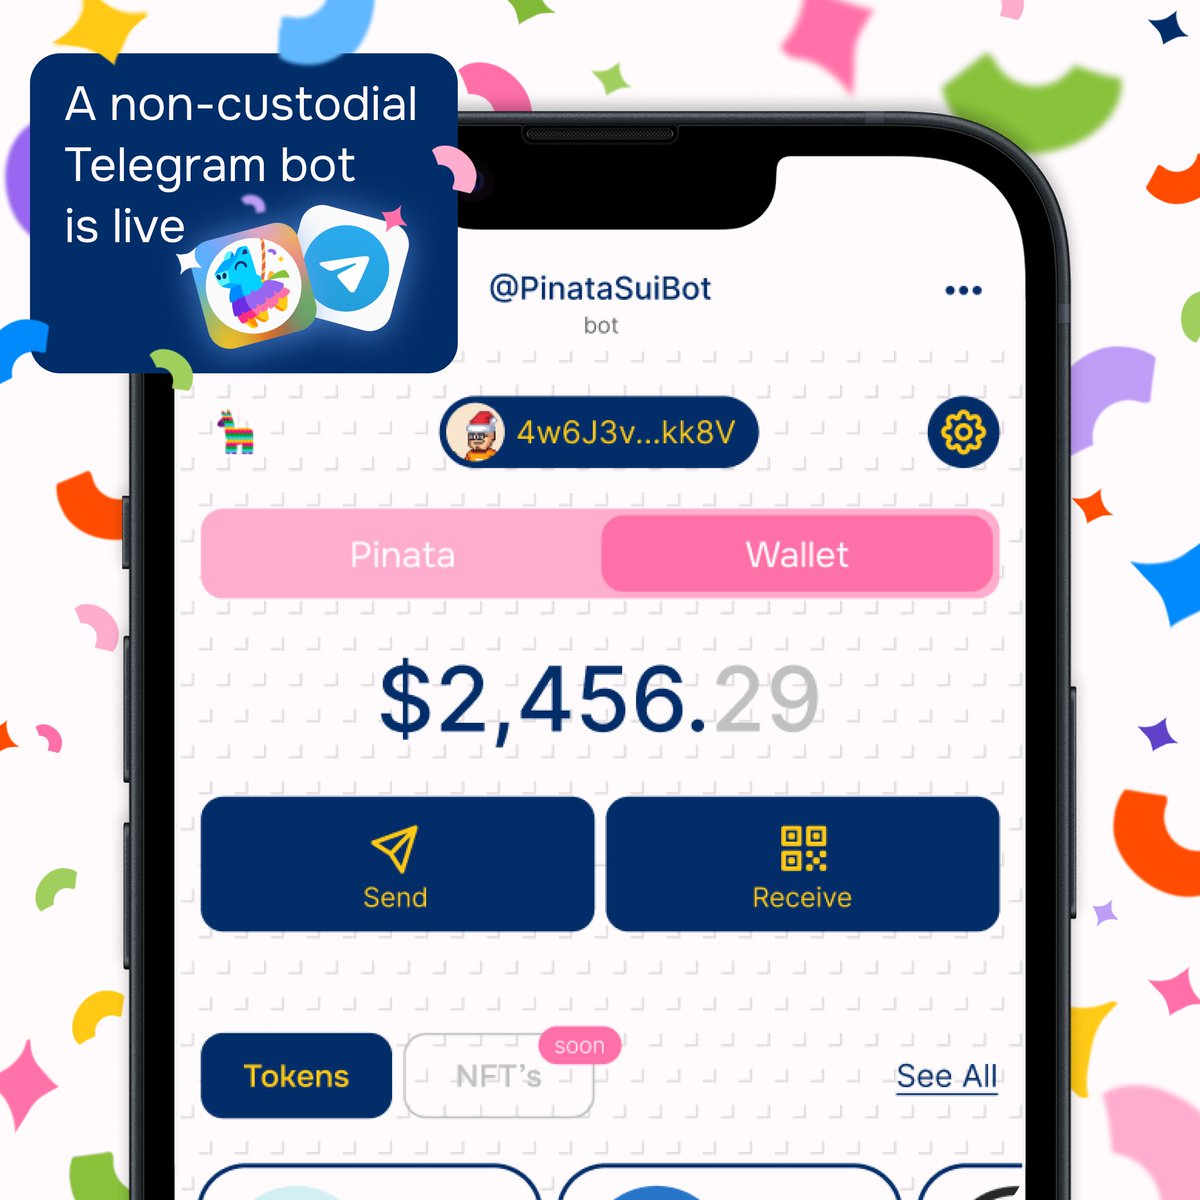 Introducing PinataBot! 🎉

A non-custodial Telegram bot, PinataBot lets you share coins, NFTs, and other assets on @SuiNetwork with friends using the Telegram web app. Plus, you can earn donut points🍩.

Learn more below👇 1/9